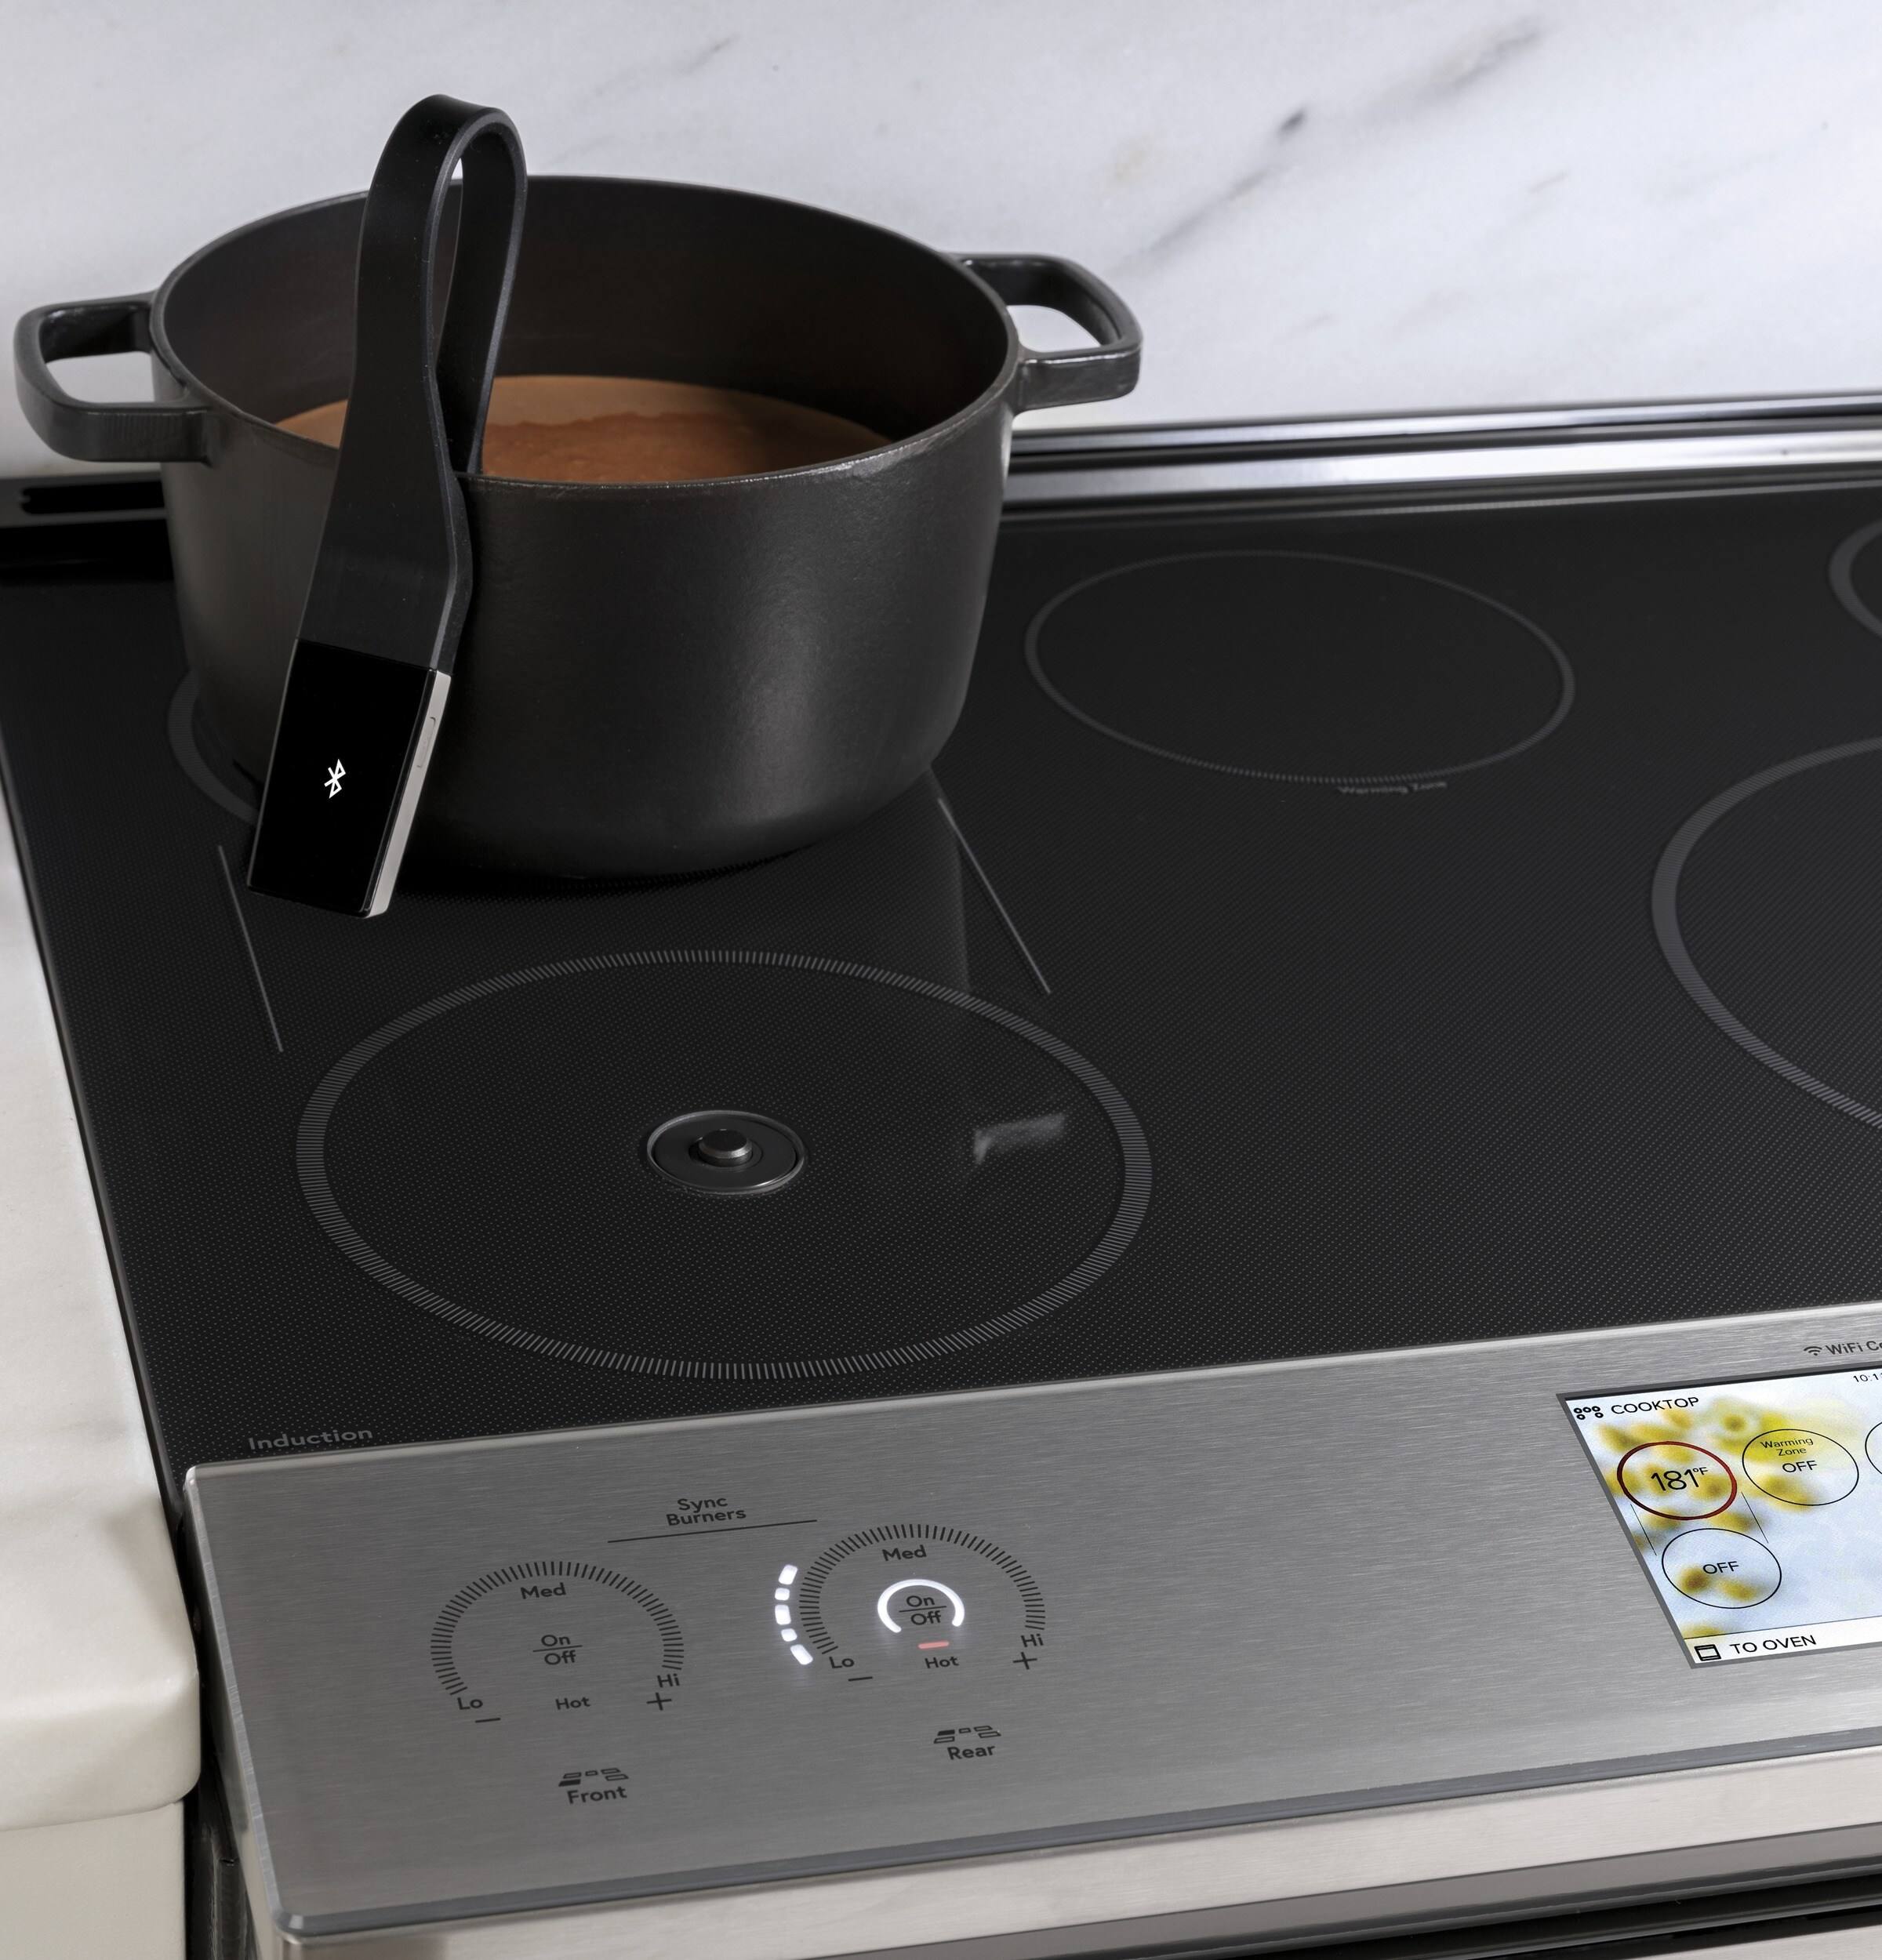 Cafe Induction Cooktop Bluetooth Cooking Probe (Black) in the